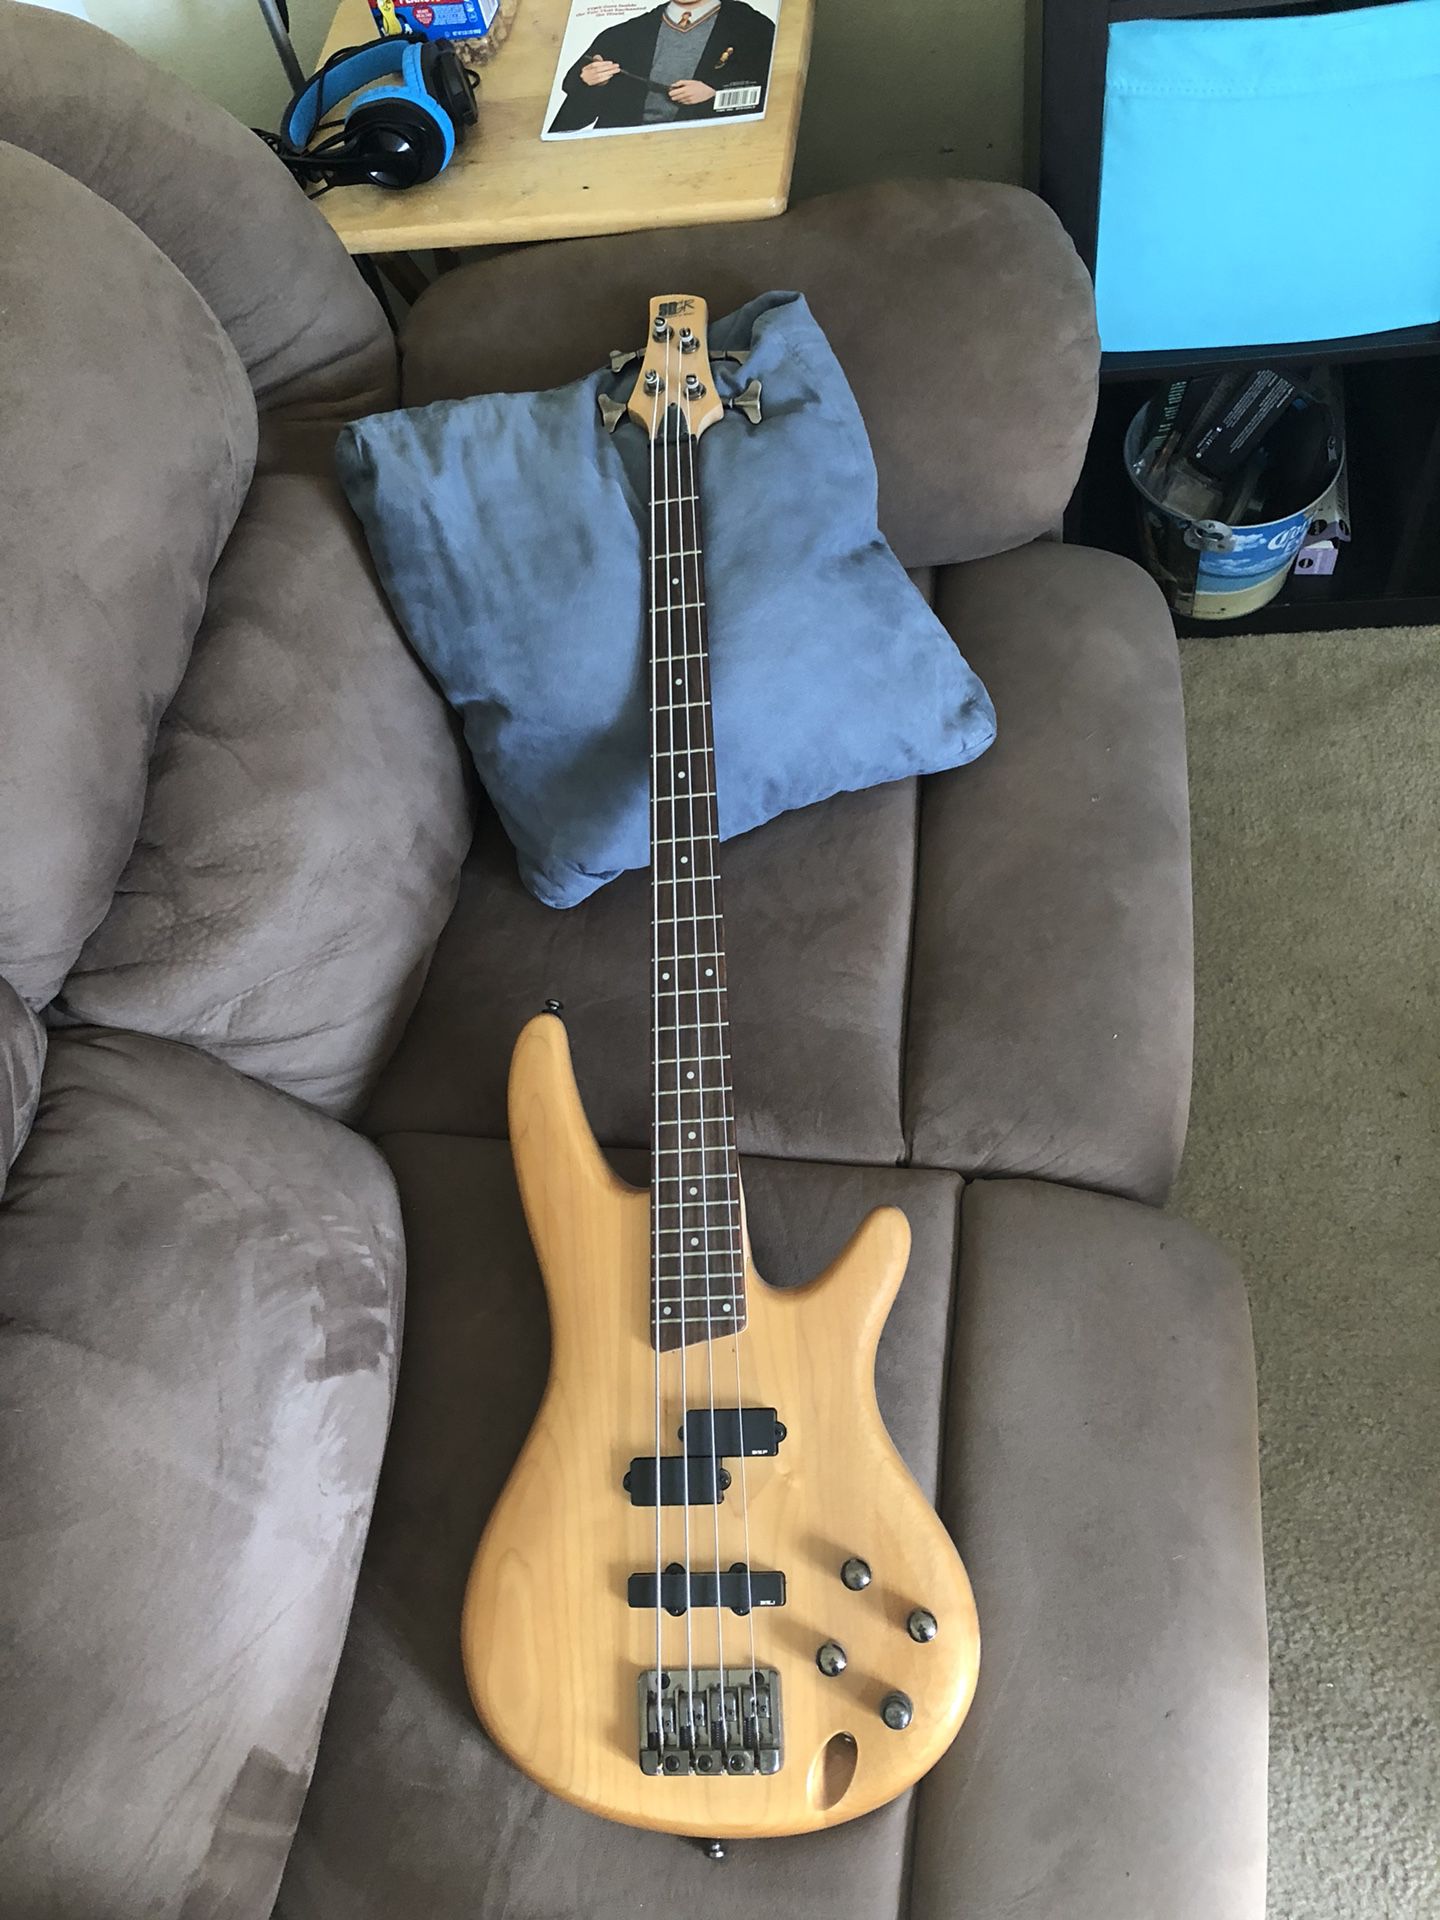 Soundgear by Ibanez Bass Guitar - Perfect Condition - Great Quality